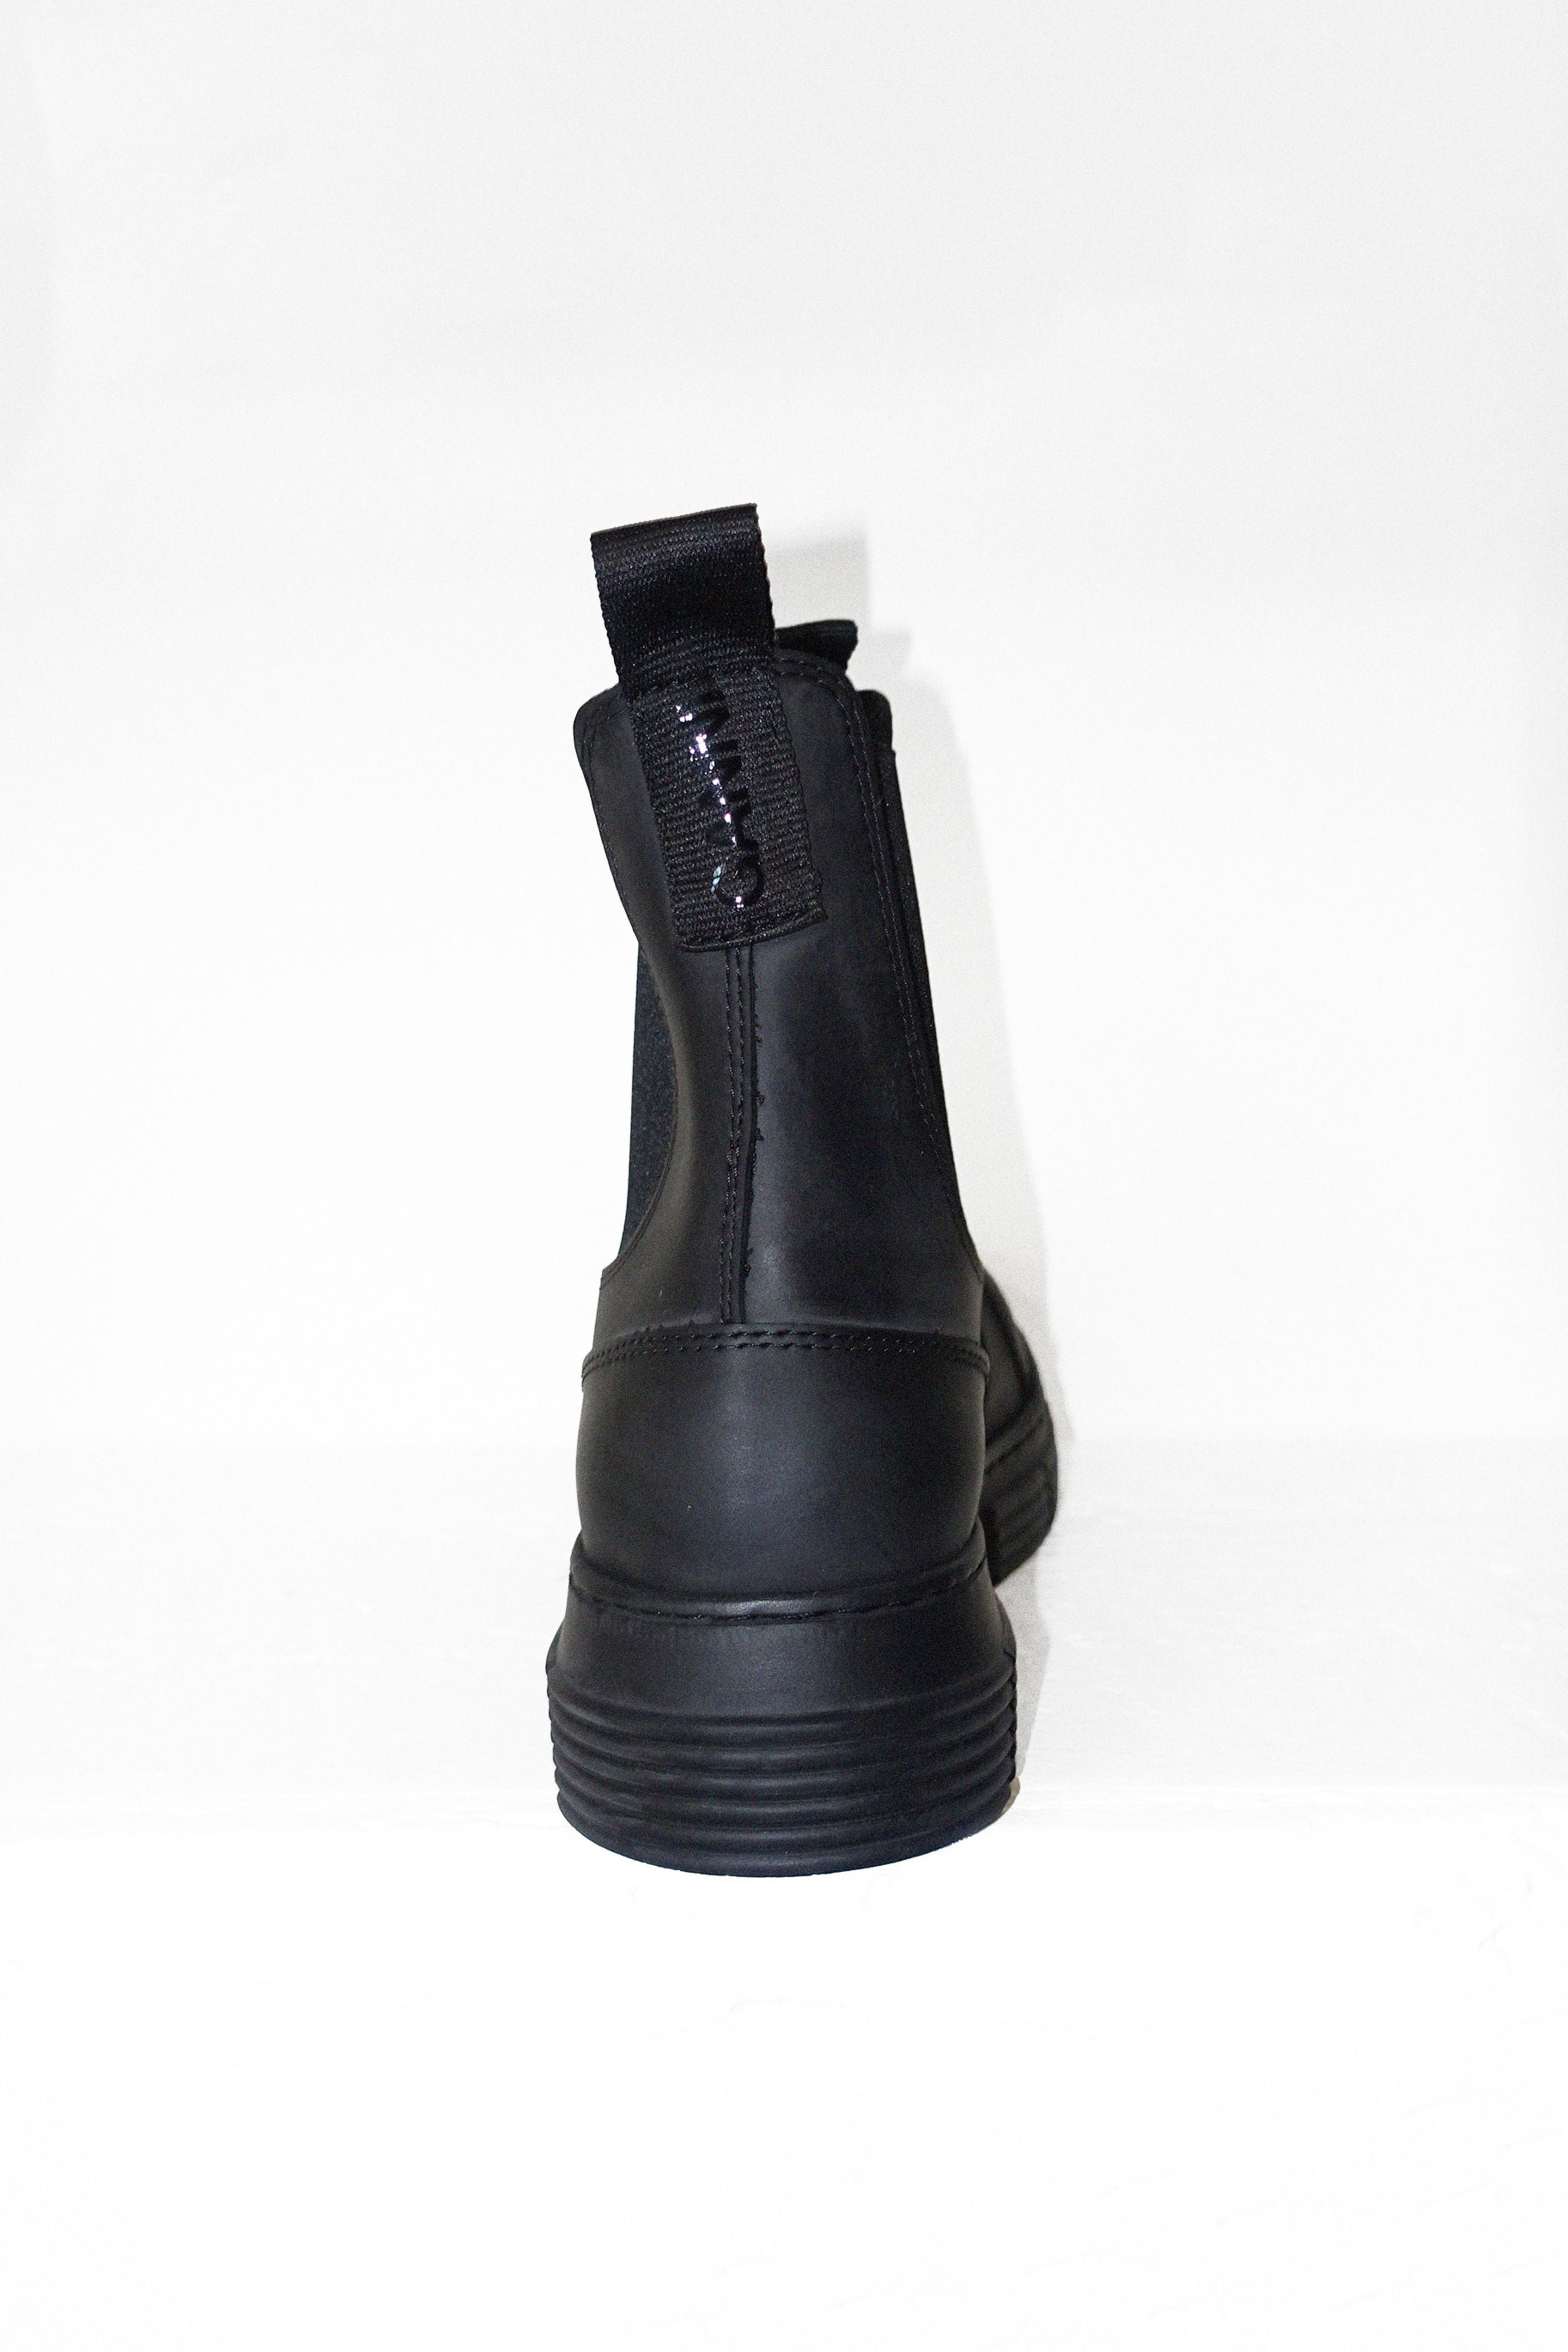 City Boot in Black Recycled Rubber